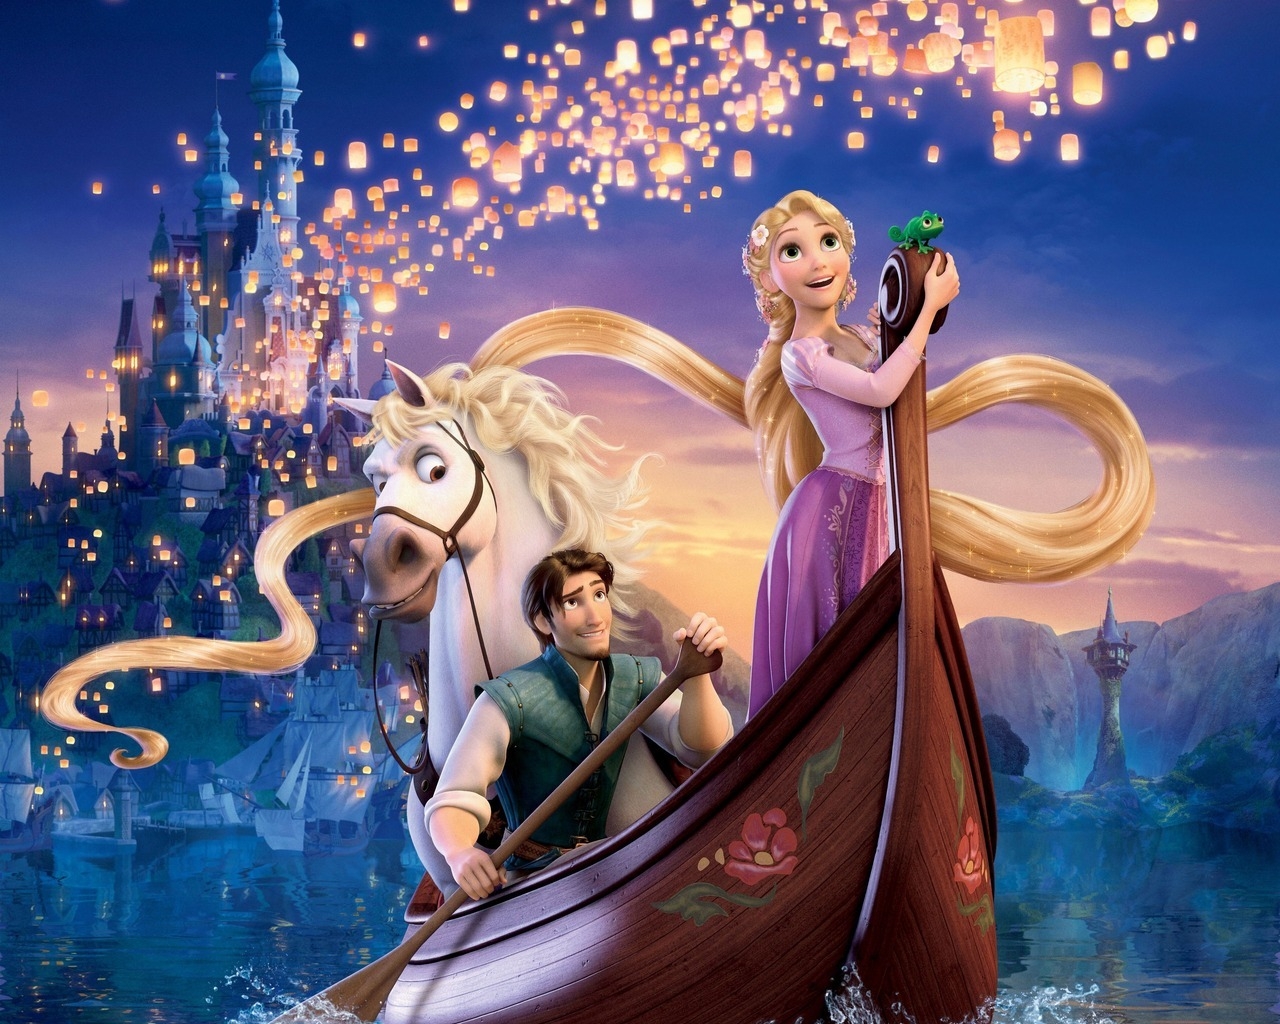 Tangled Musical Film for 1280 x 1024 resolution